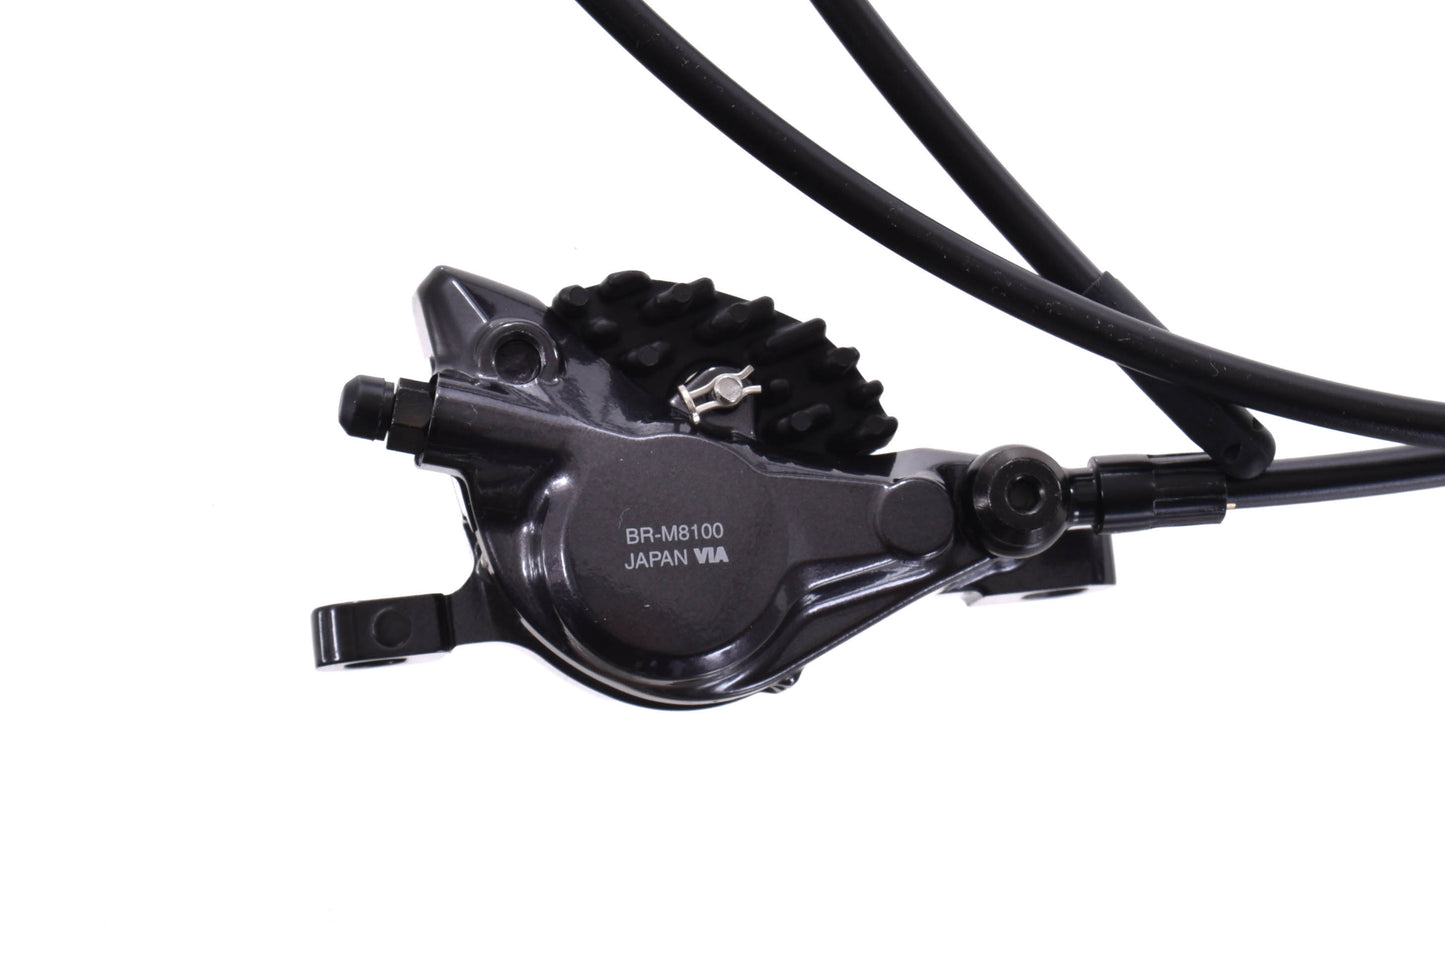 NEW Take off Shimano Deore XT BR-M8100 Disc Brake Caliper and hose